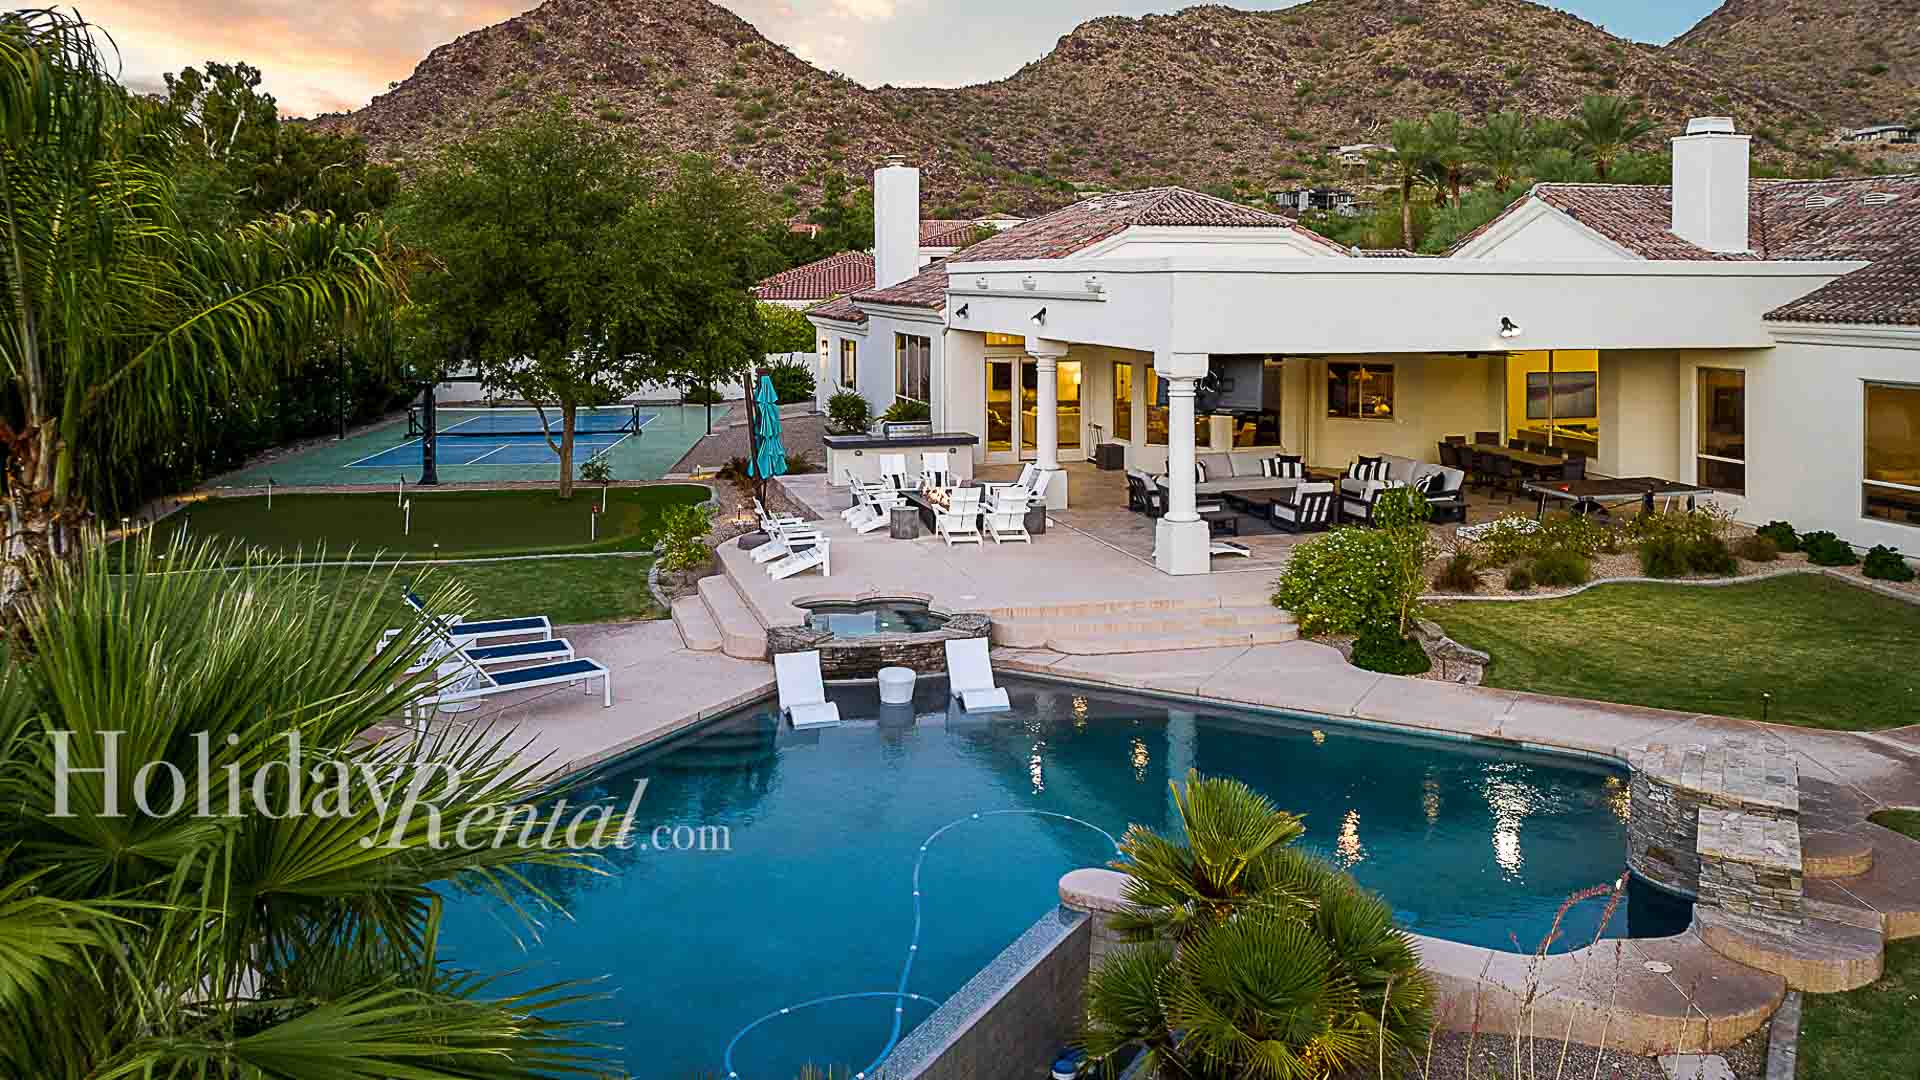 Large entertainment backyard w/ loungers, pool, spa, firepit, and games.